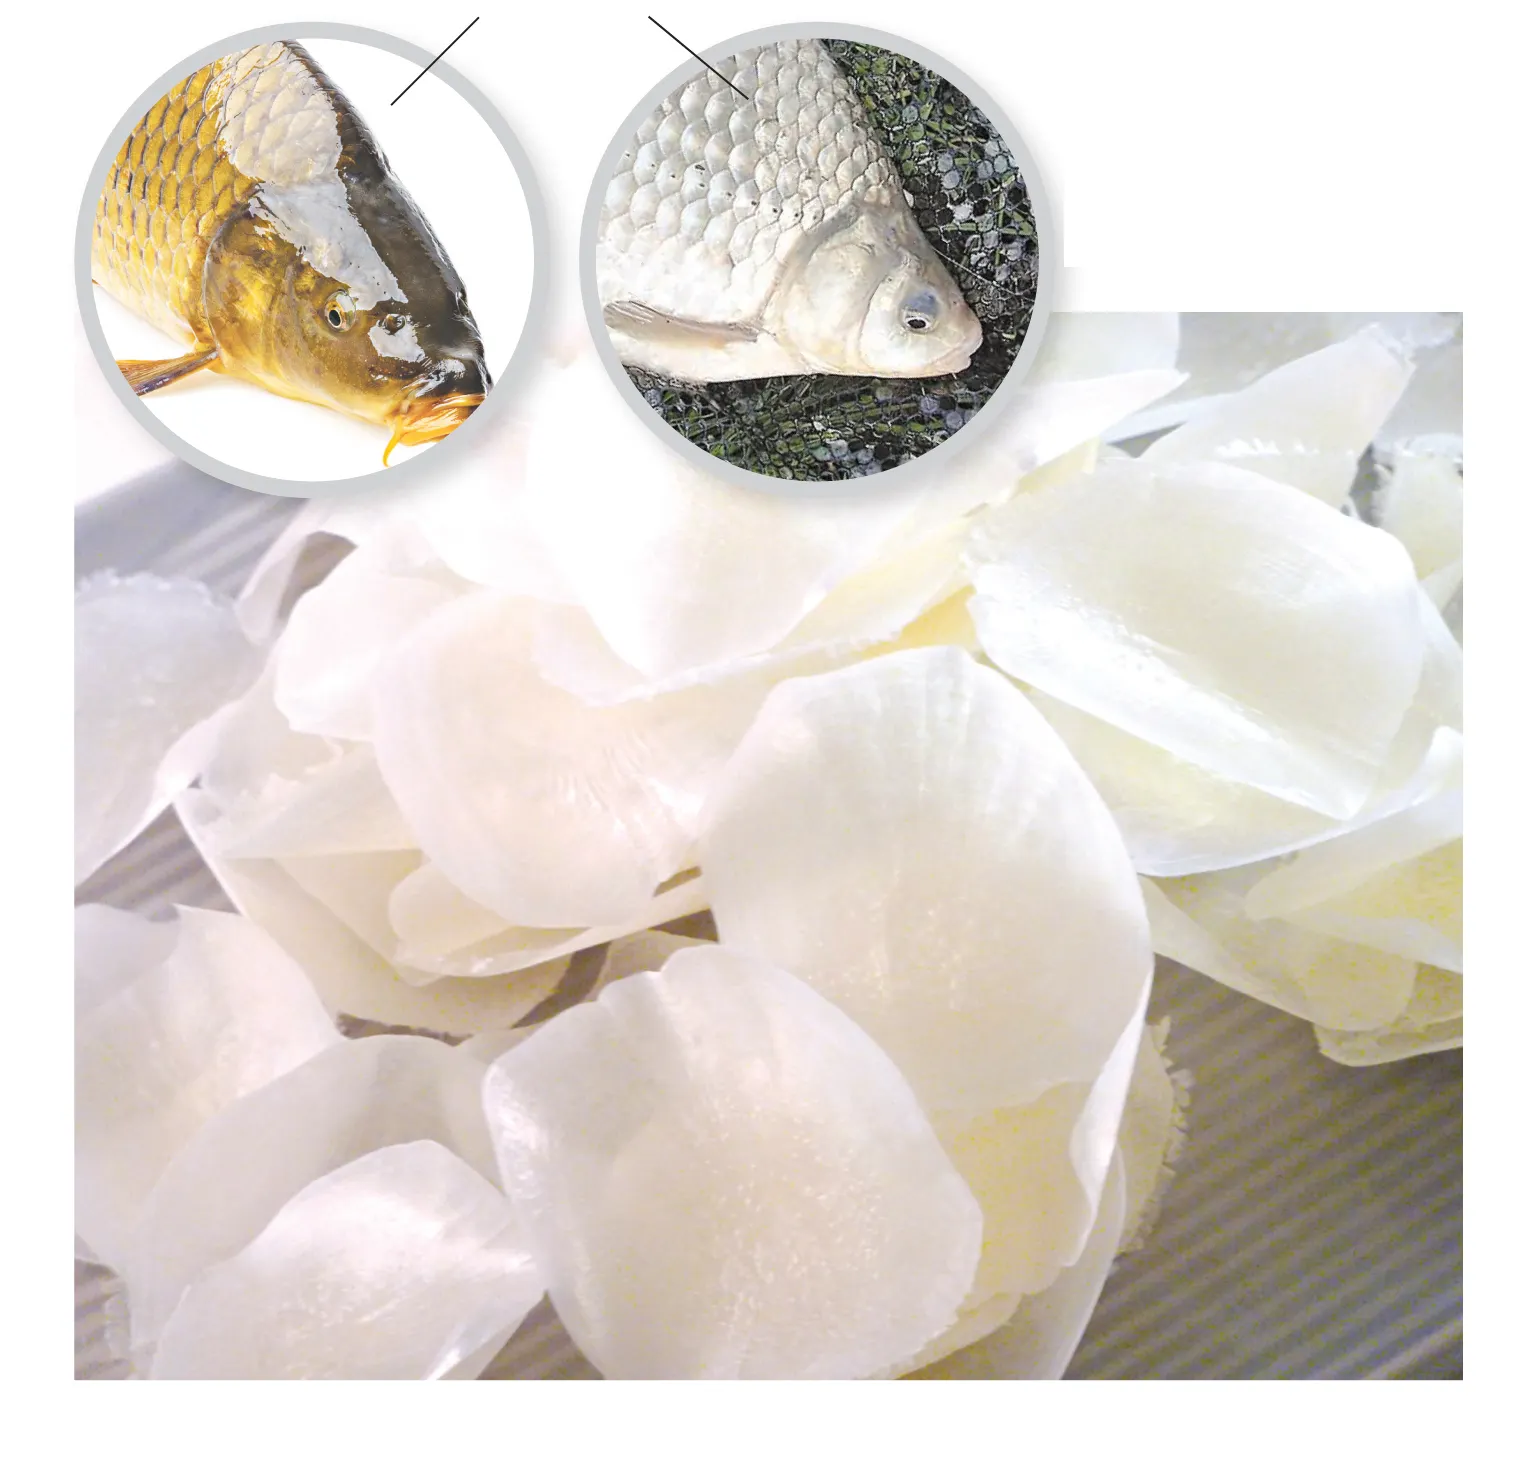 DRIED FISH SCALES - Vietnam Supplier - Good price - High Quality